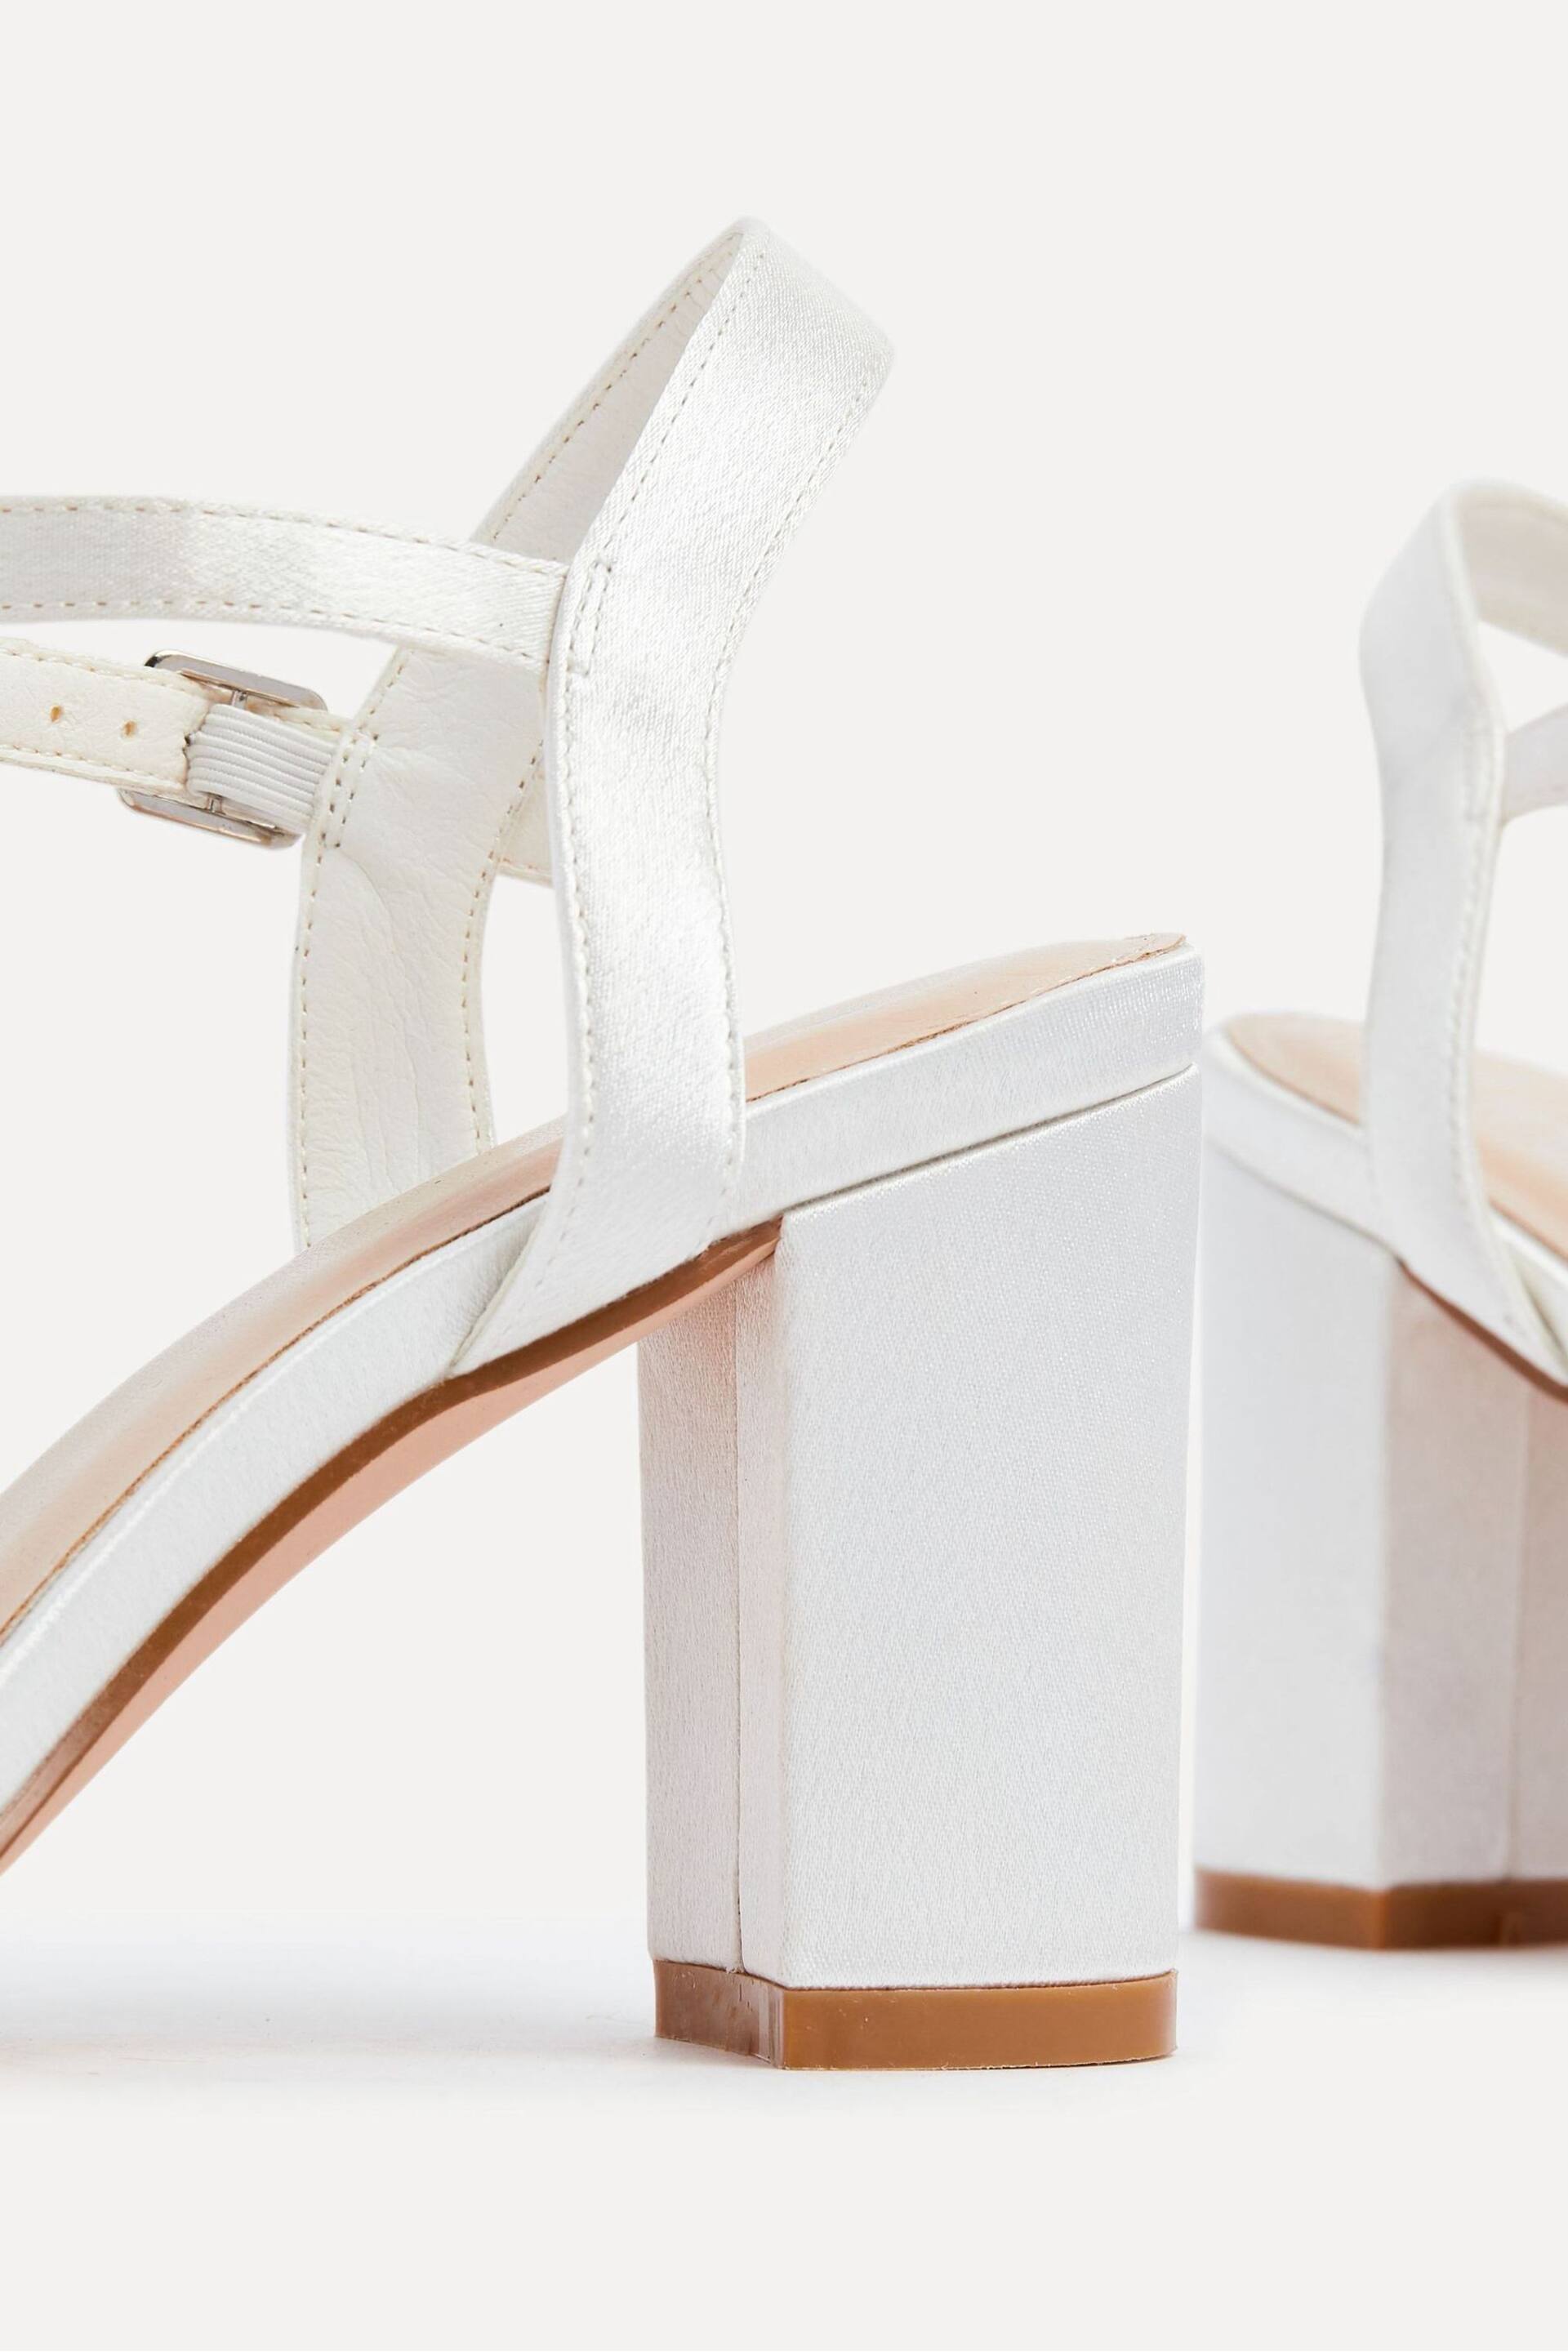 Linzi Cream Tinsley Block Heeled Sandals With Pearl and Diamante Front Strap - Image 5 of 5